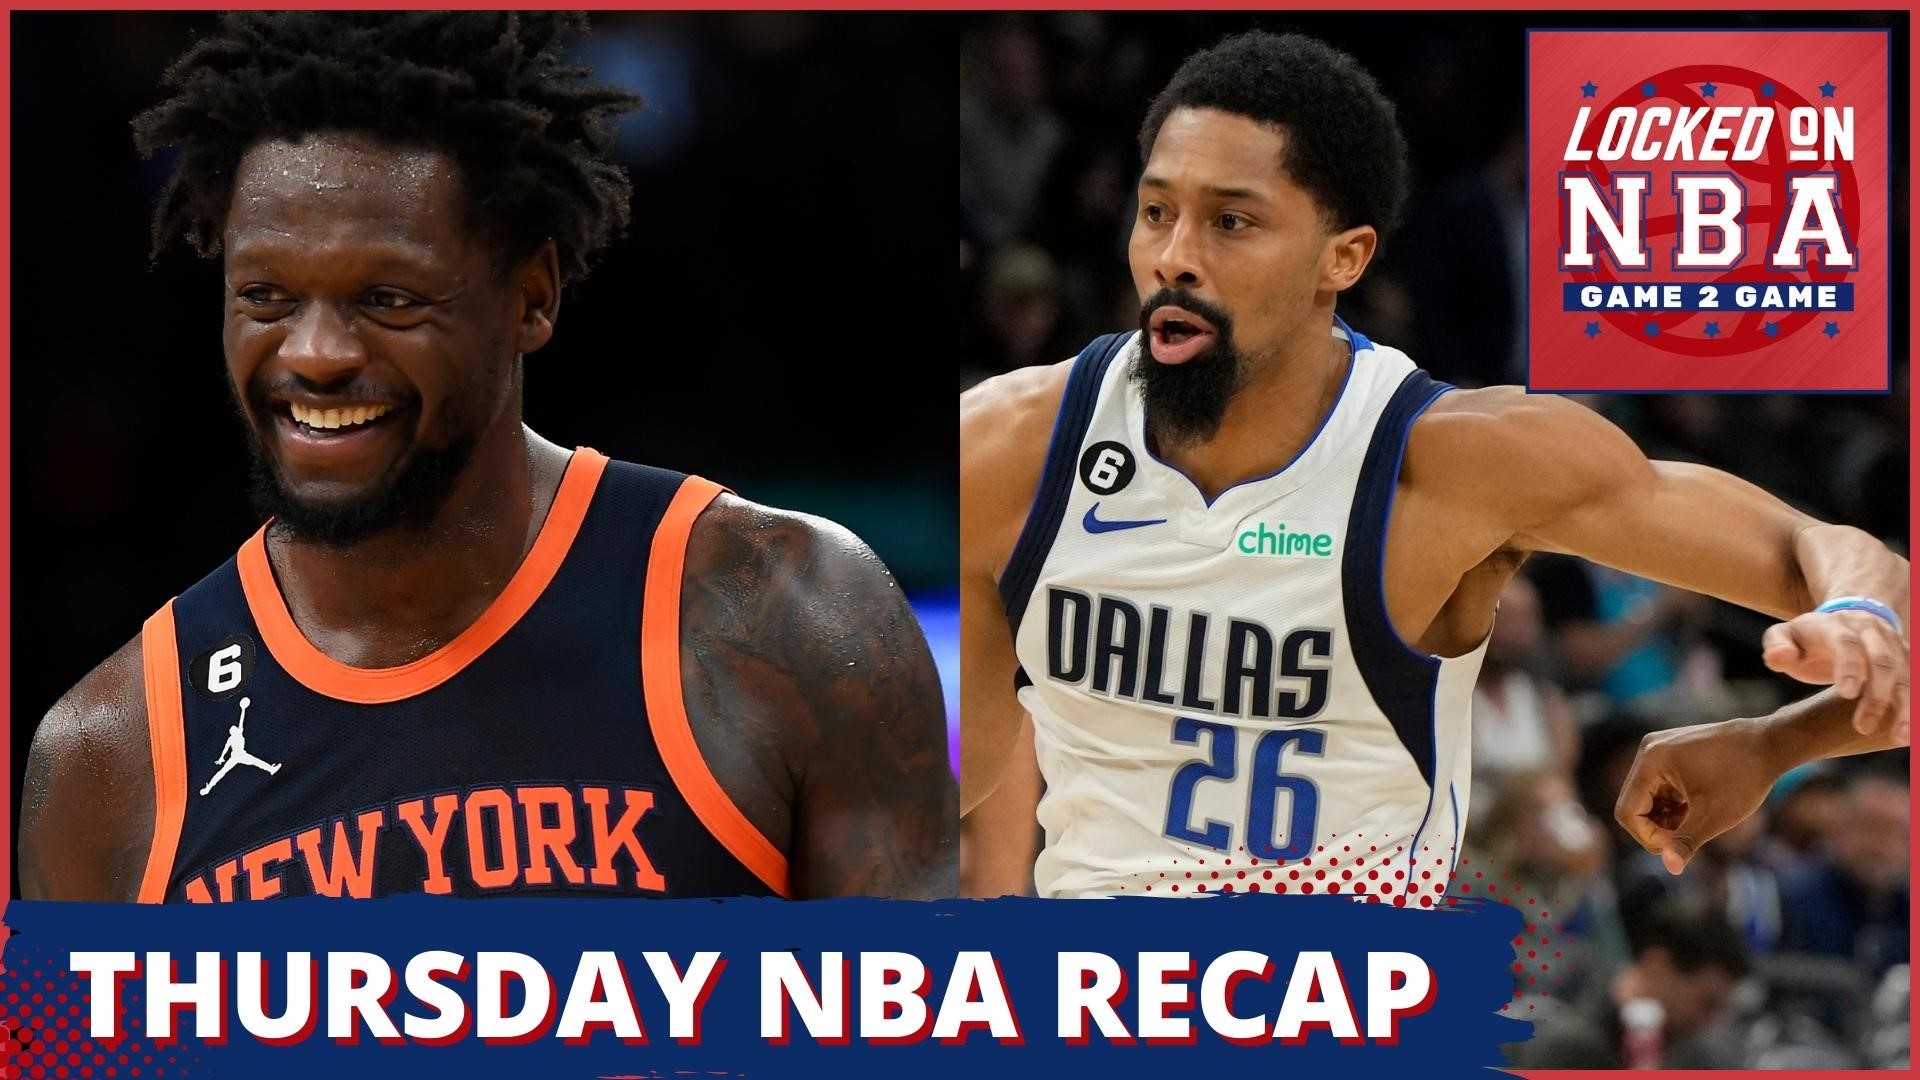 Discussing the day's top sports stories from the Mavericks getting a win without Luka to the Pistons surprising the Nets.